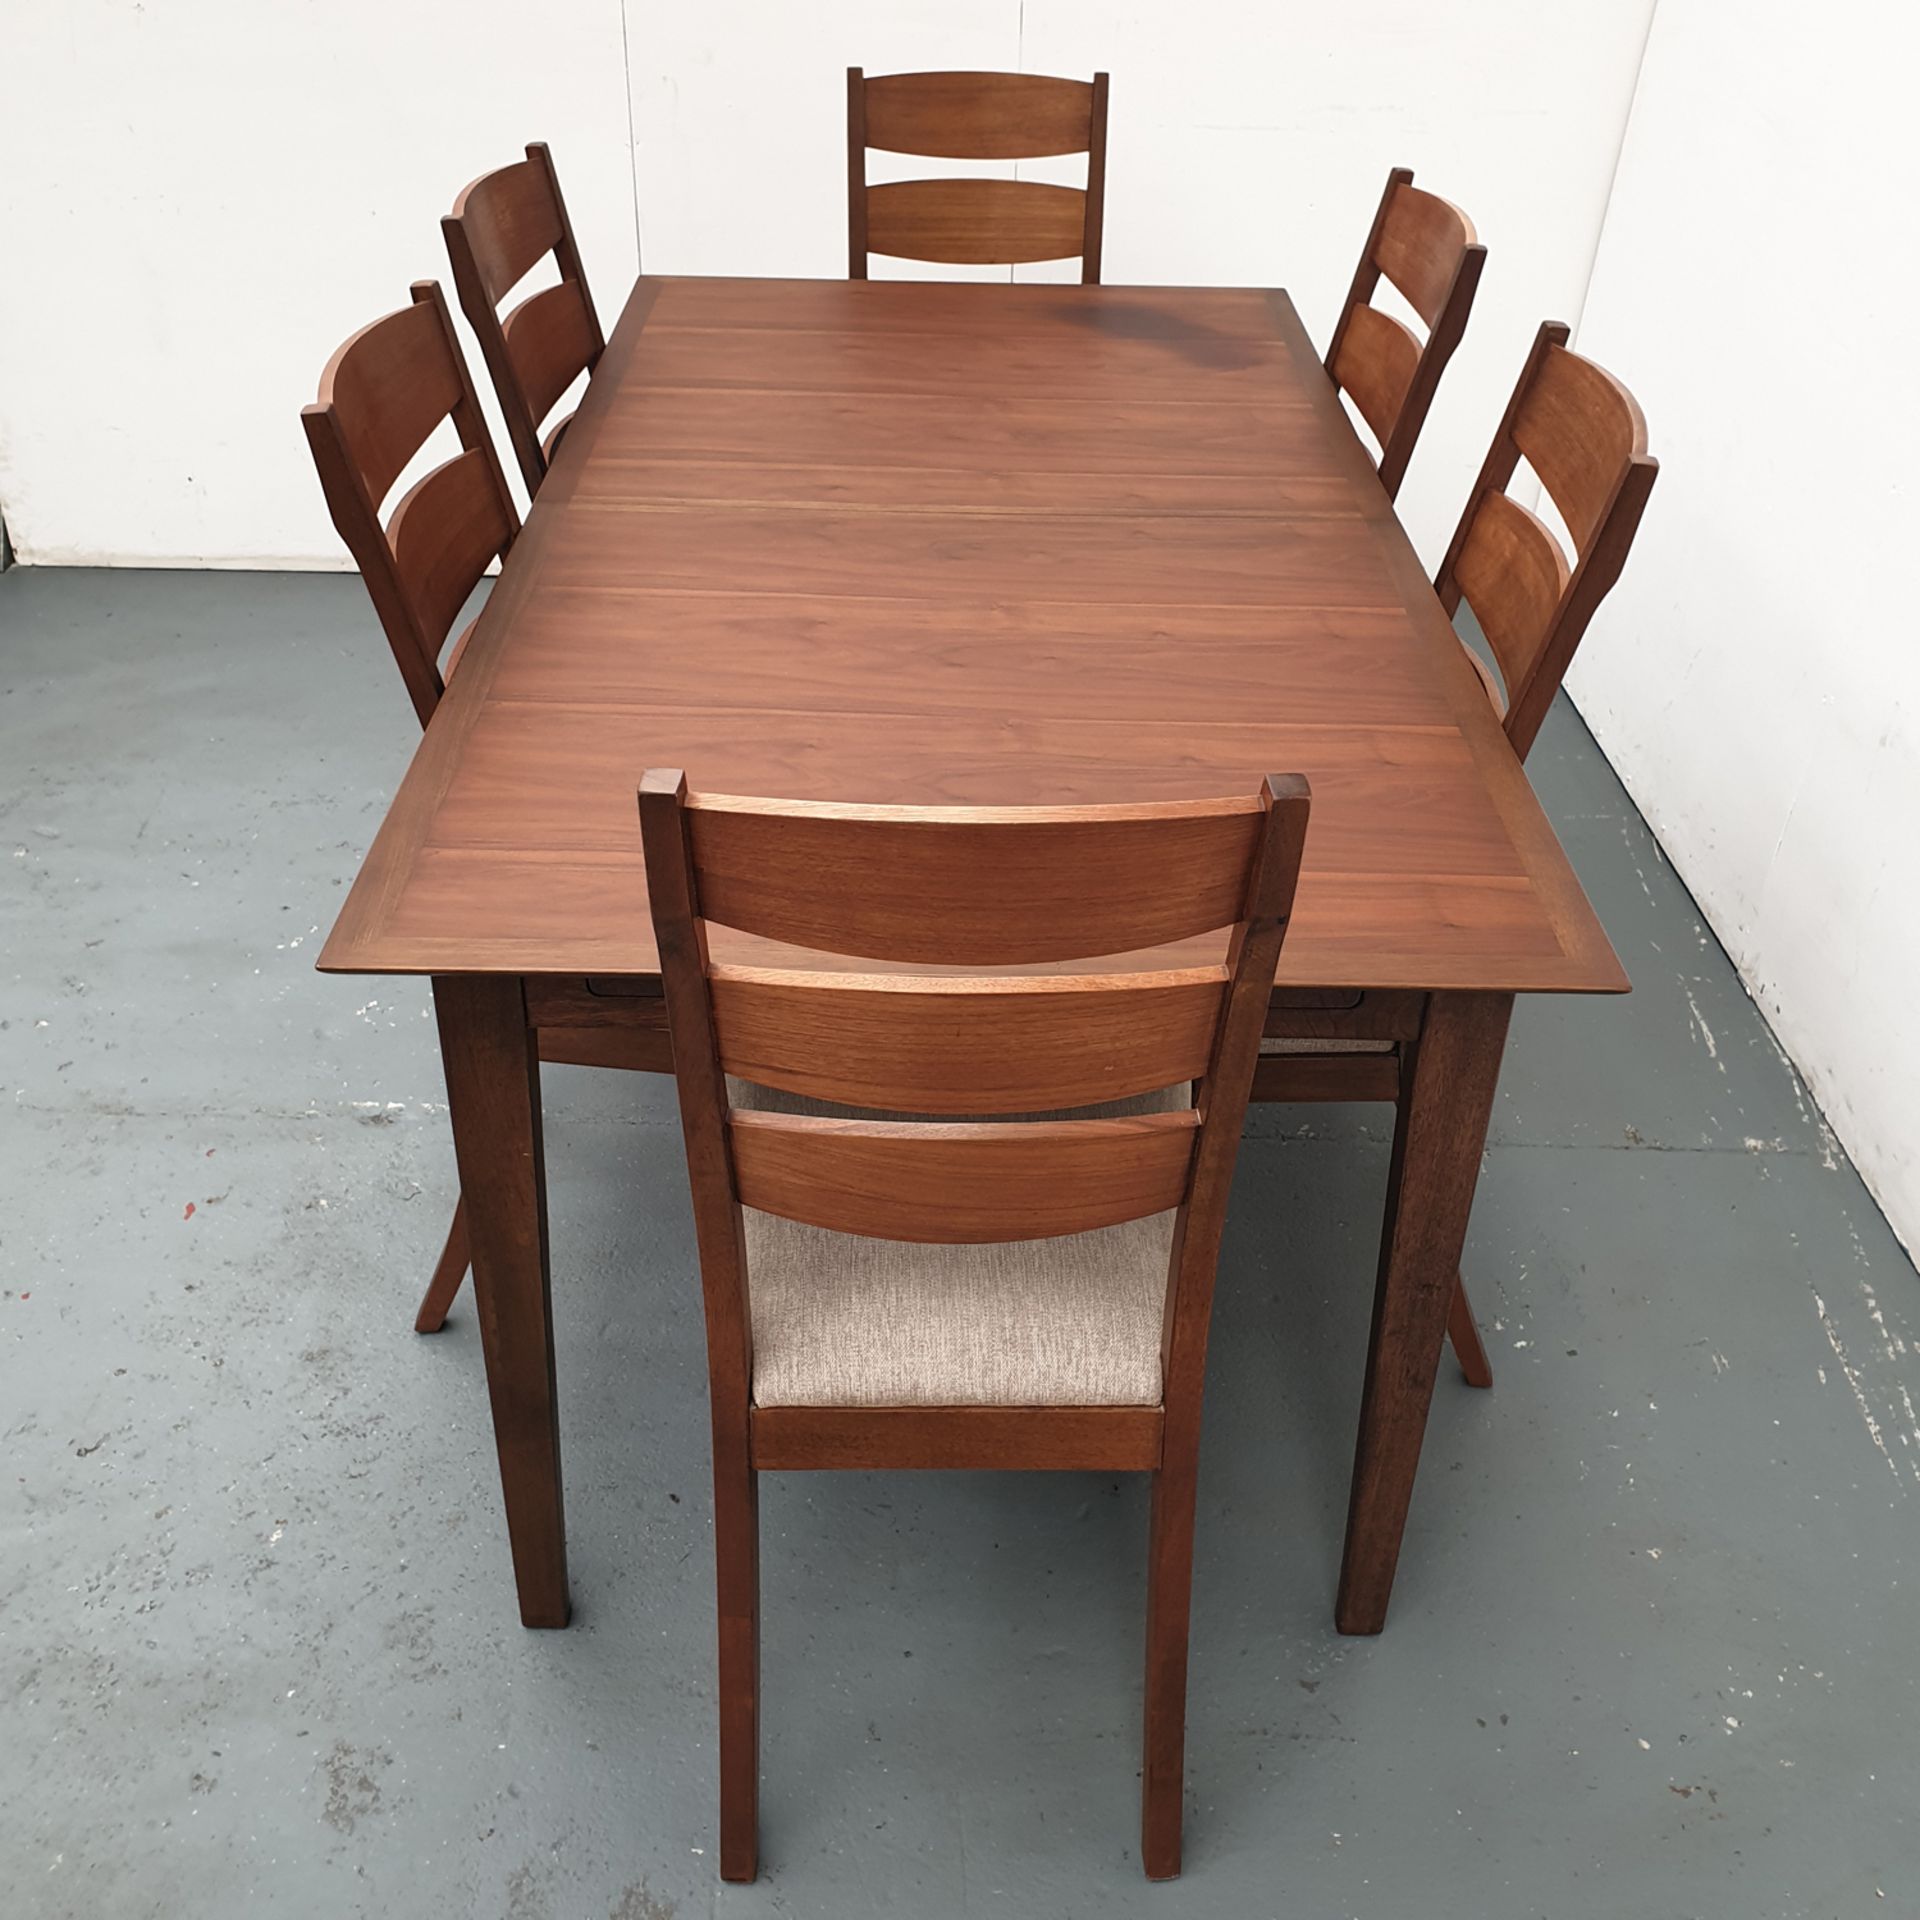 Solid Wood Dining Table & Chairs. Approx Dimensions 1700mm x 900mm x 780mm High. - Image 3 of 11